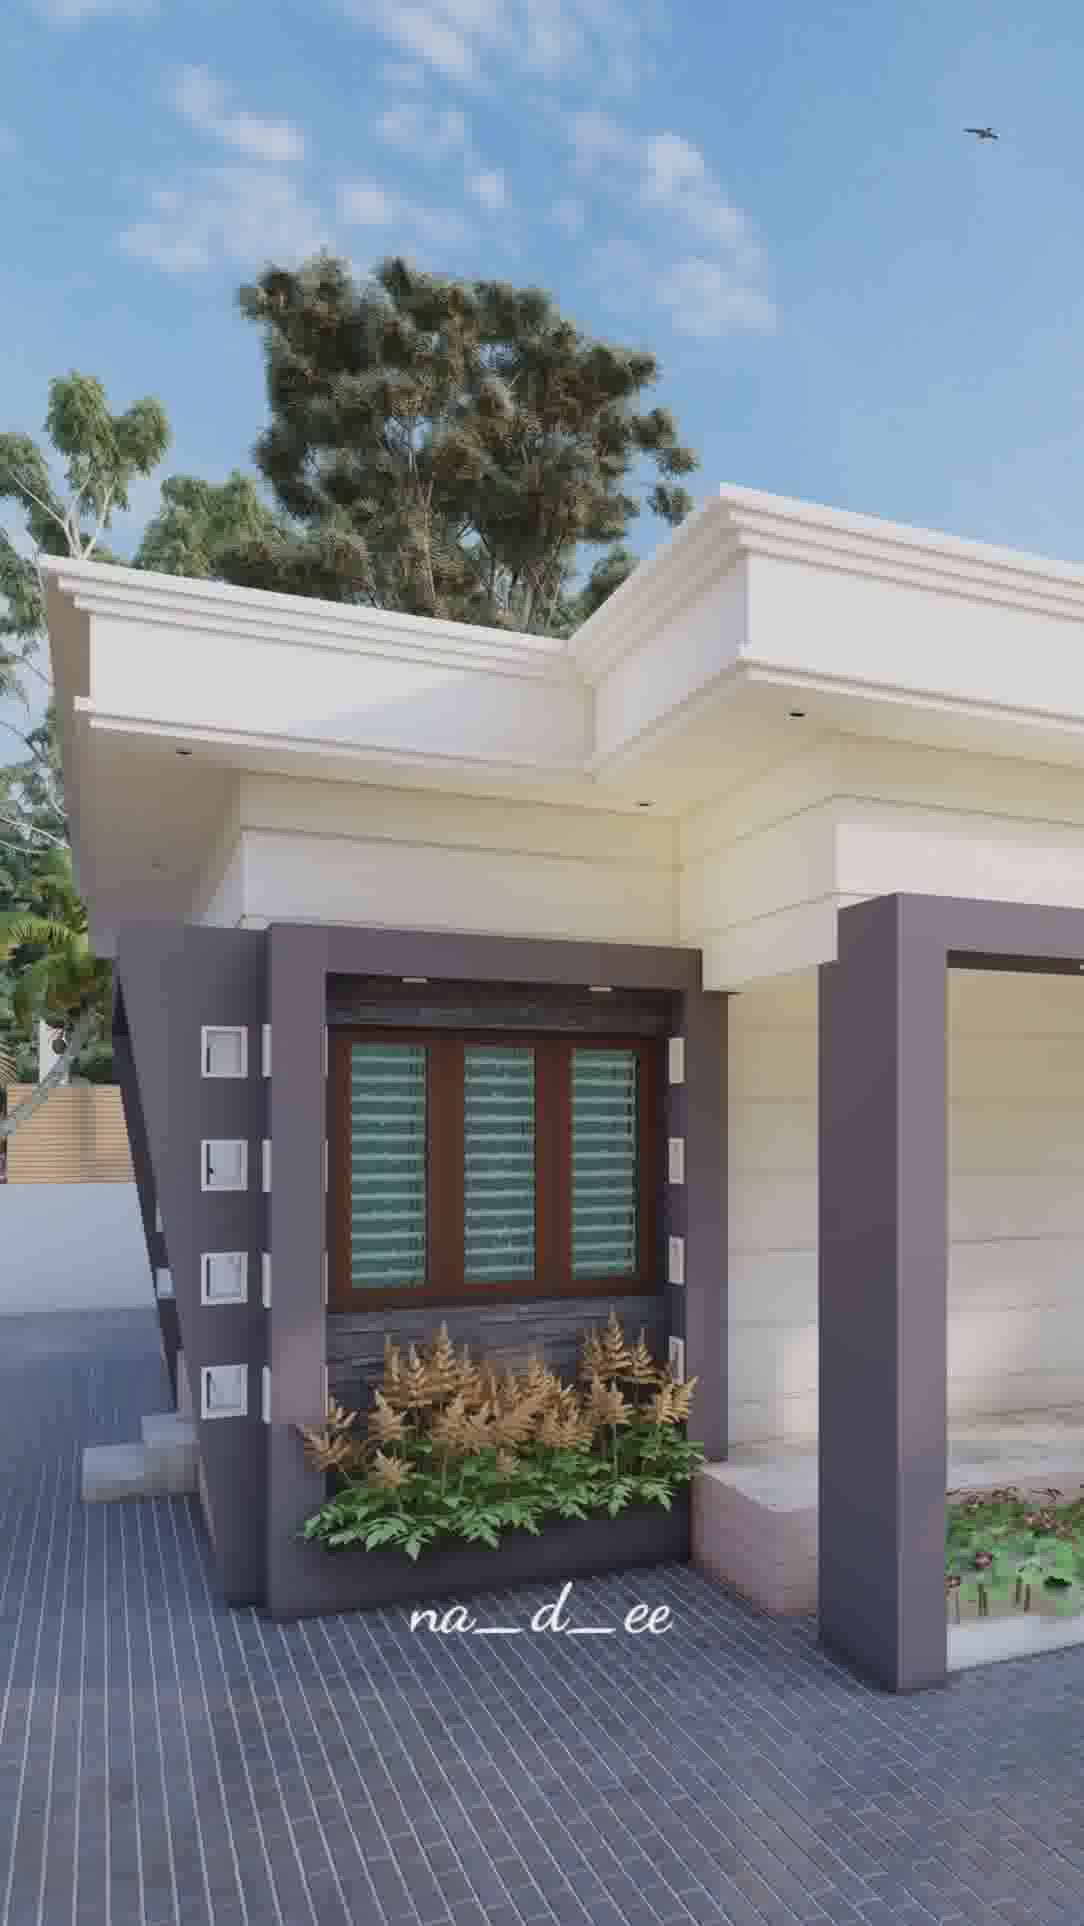 Low budget Home design's and ideas - 7306161700 #HouseDesigns #3DPlans #20LakhHouse